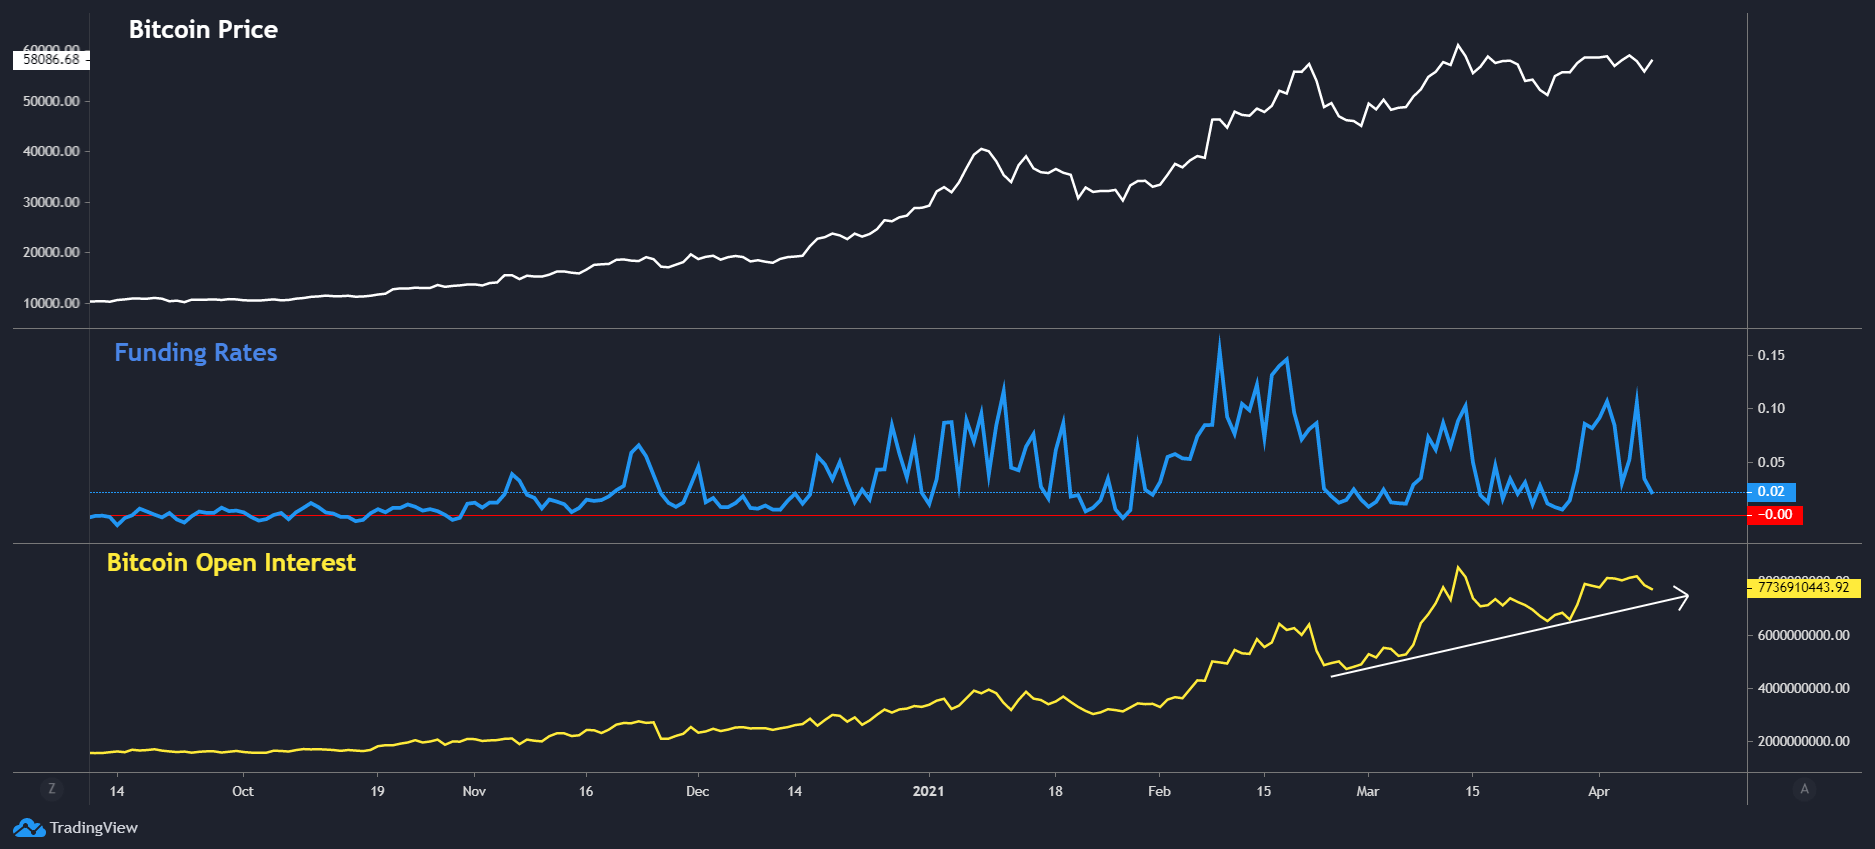 Bitcoin Open Interest and Funding rate chart